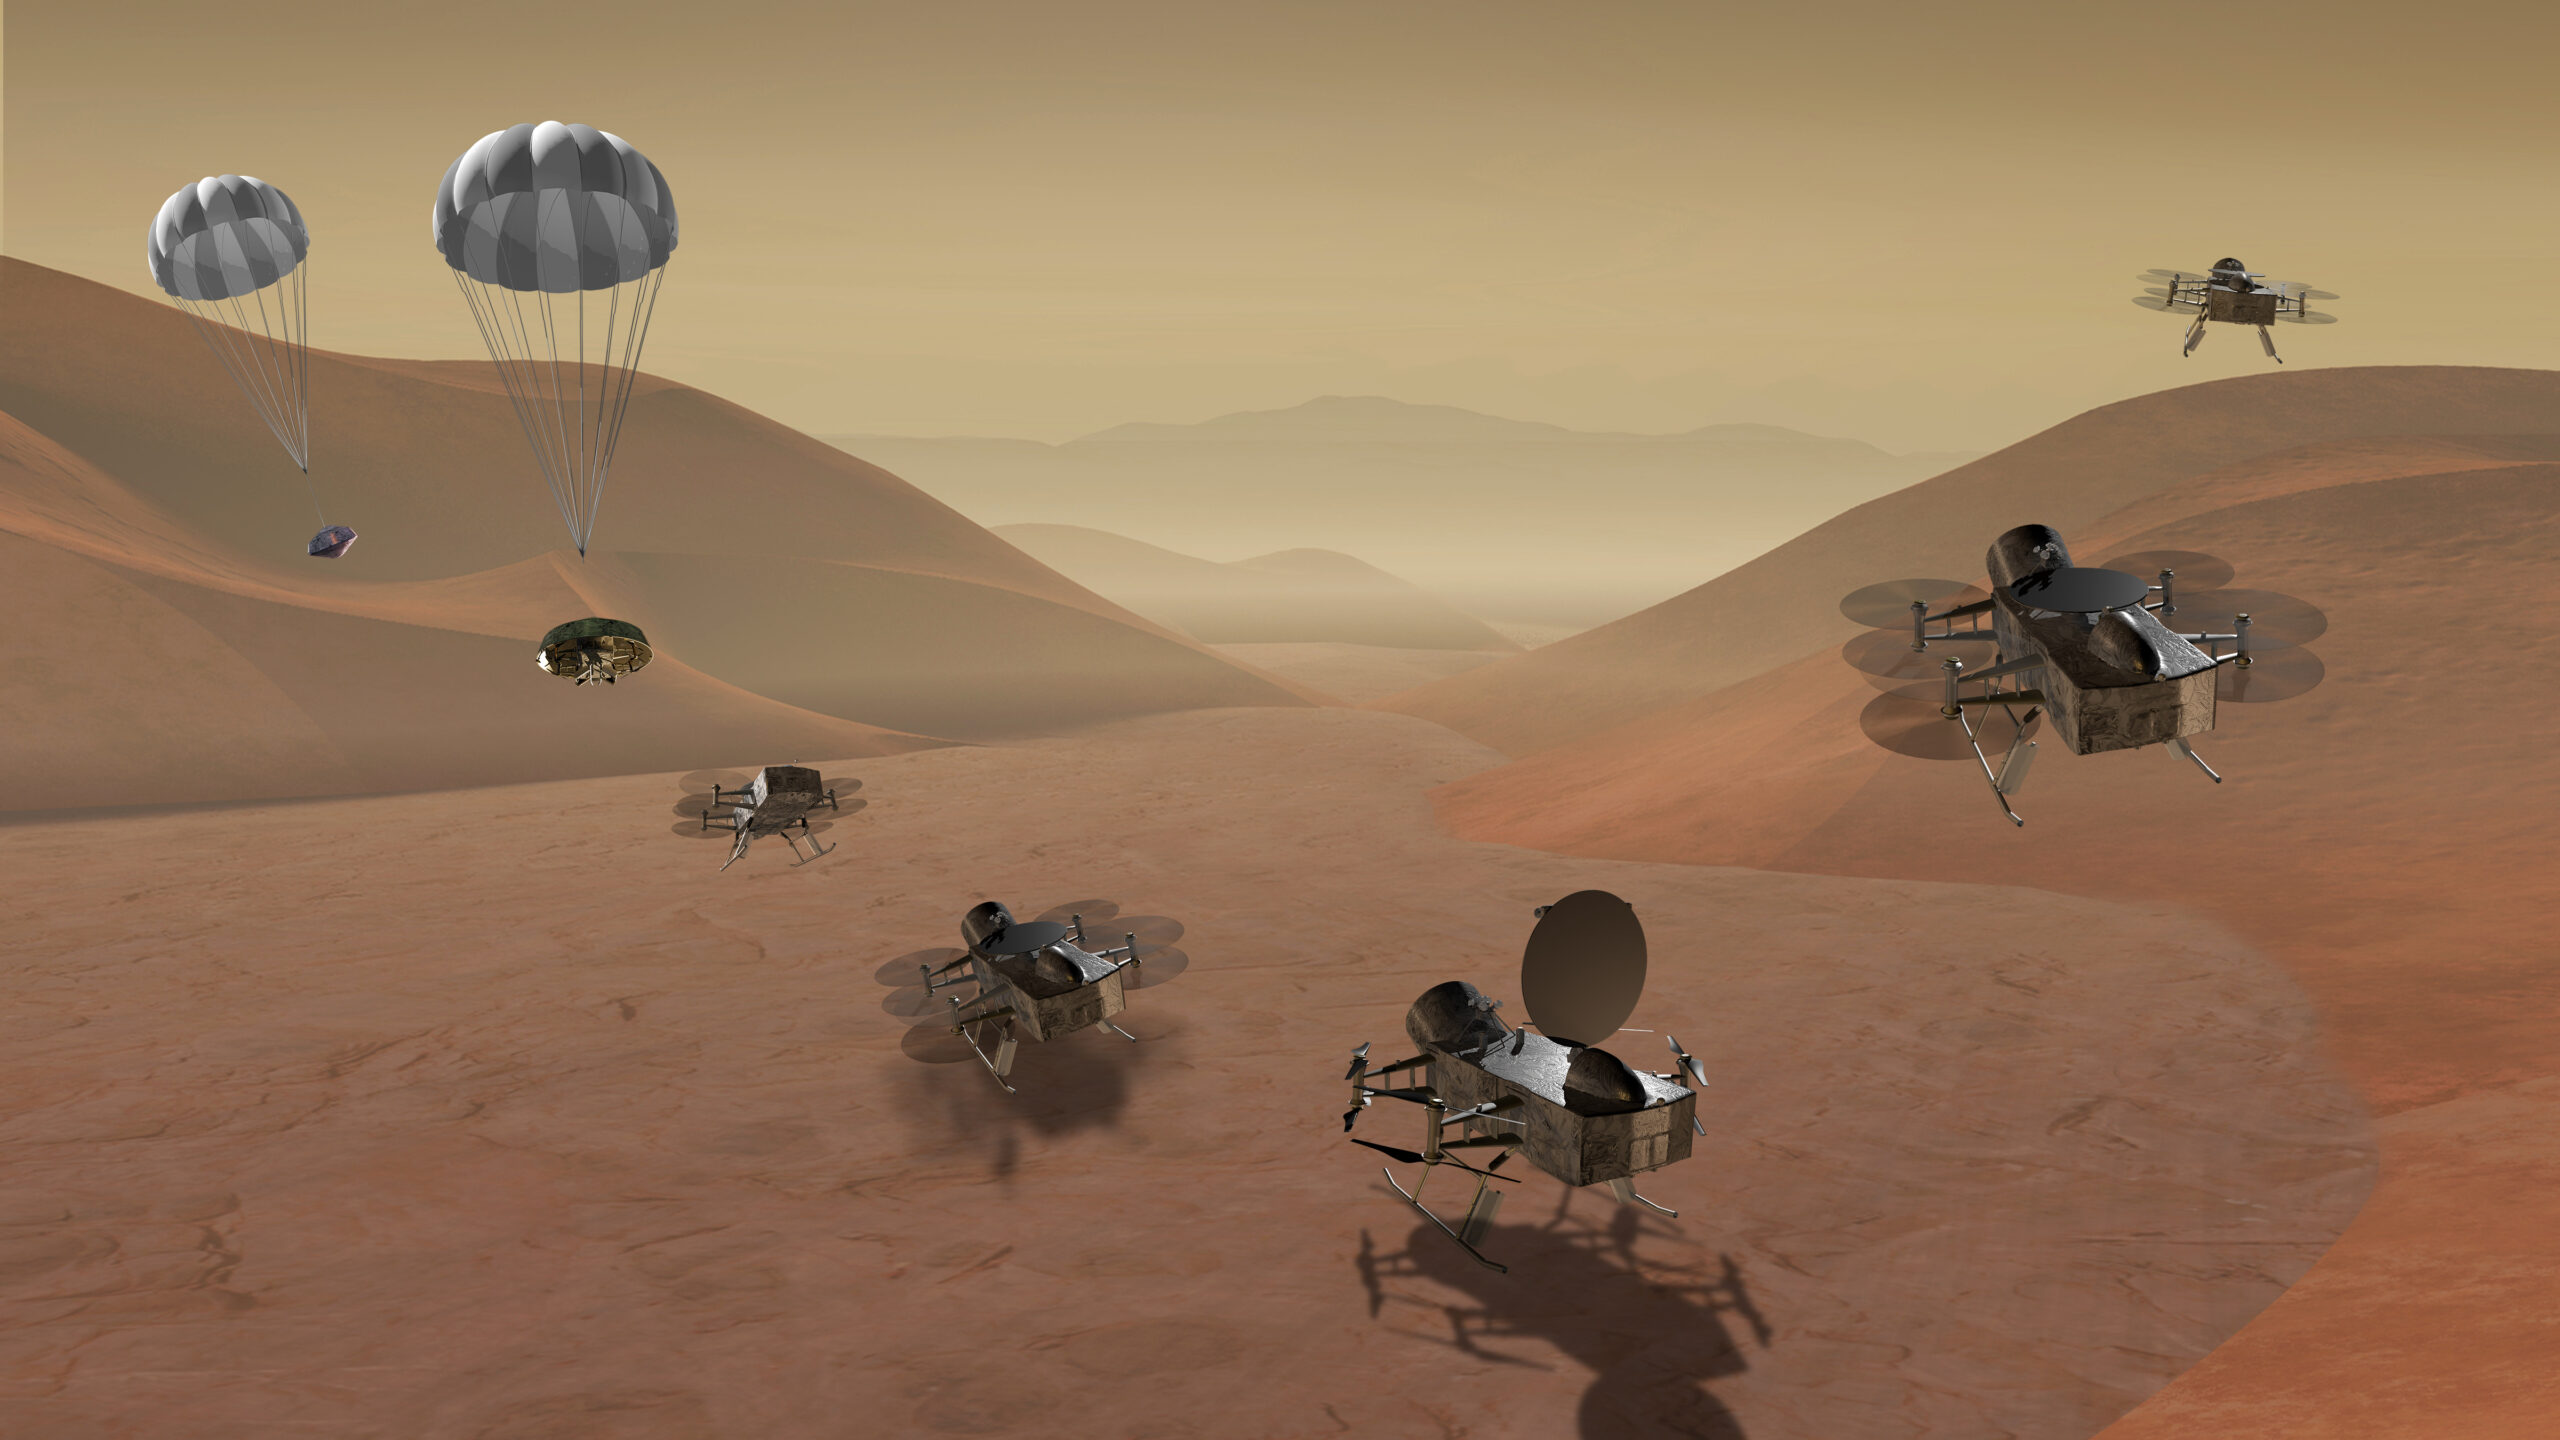 France on NASA’s Dragonfly Mission to Saturn’s Moon Titan